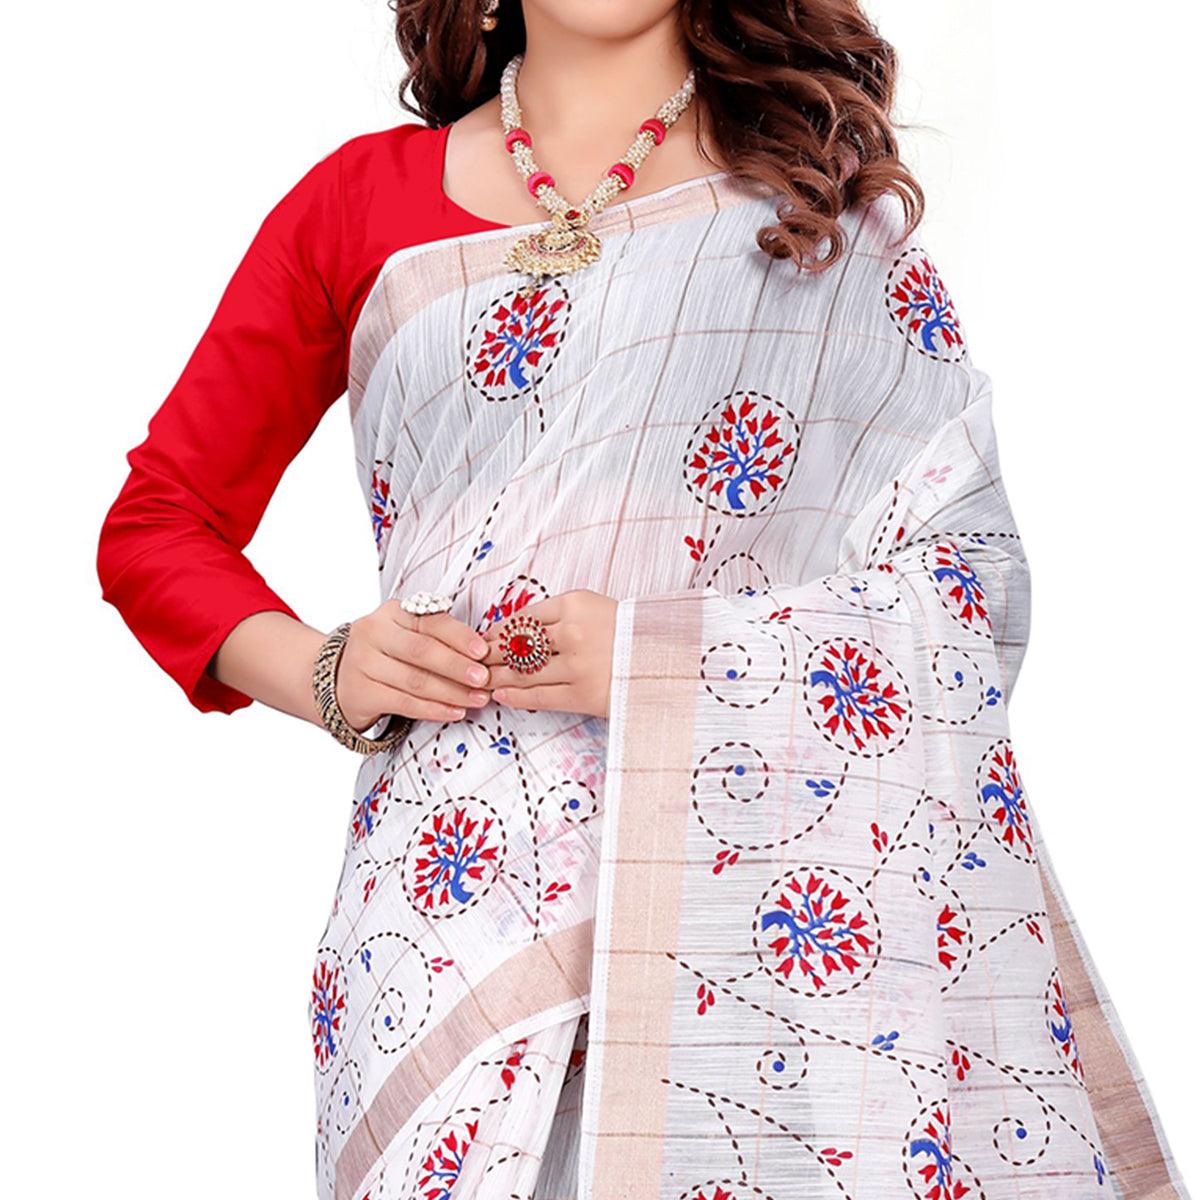 Radiant White Colored Casual Wear Printed Cotton Saree With Tassels - Peachmode